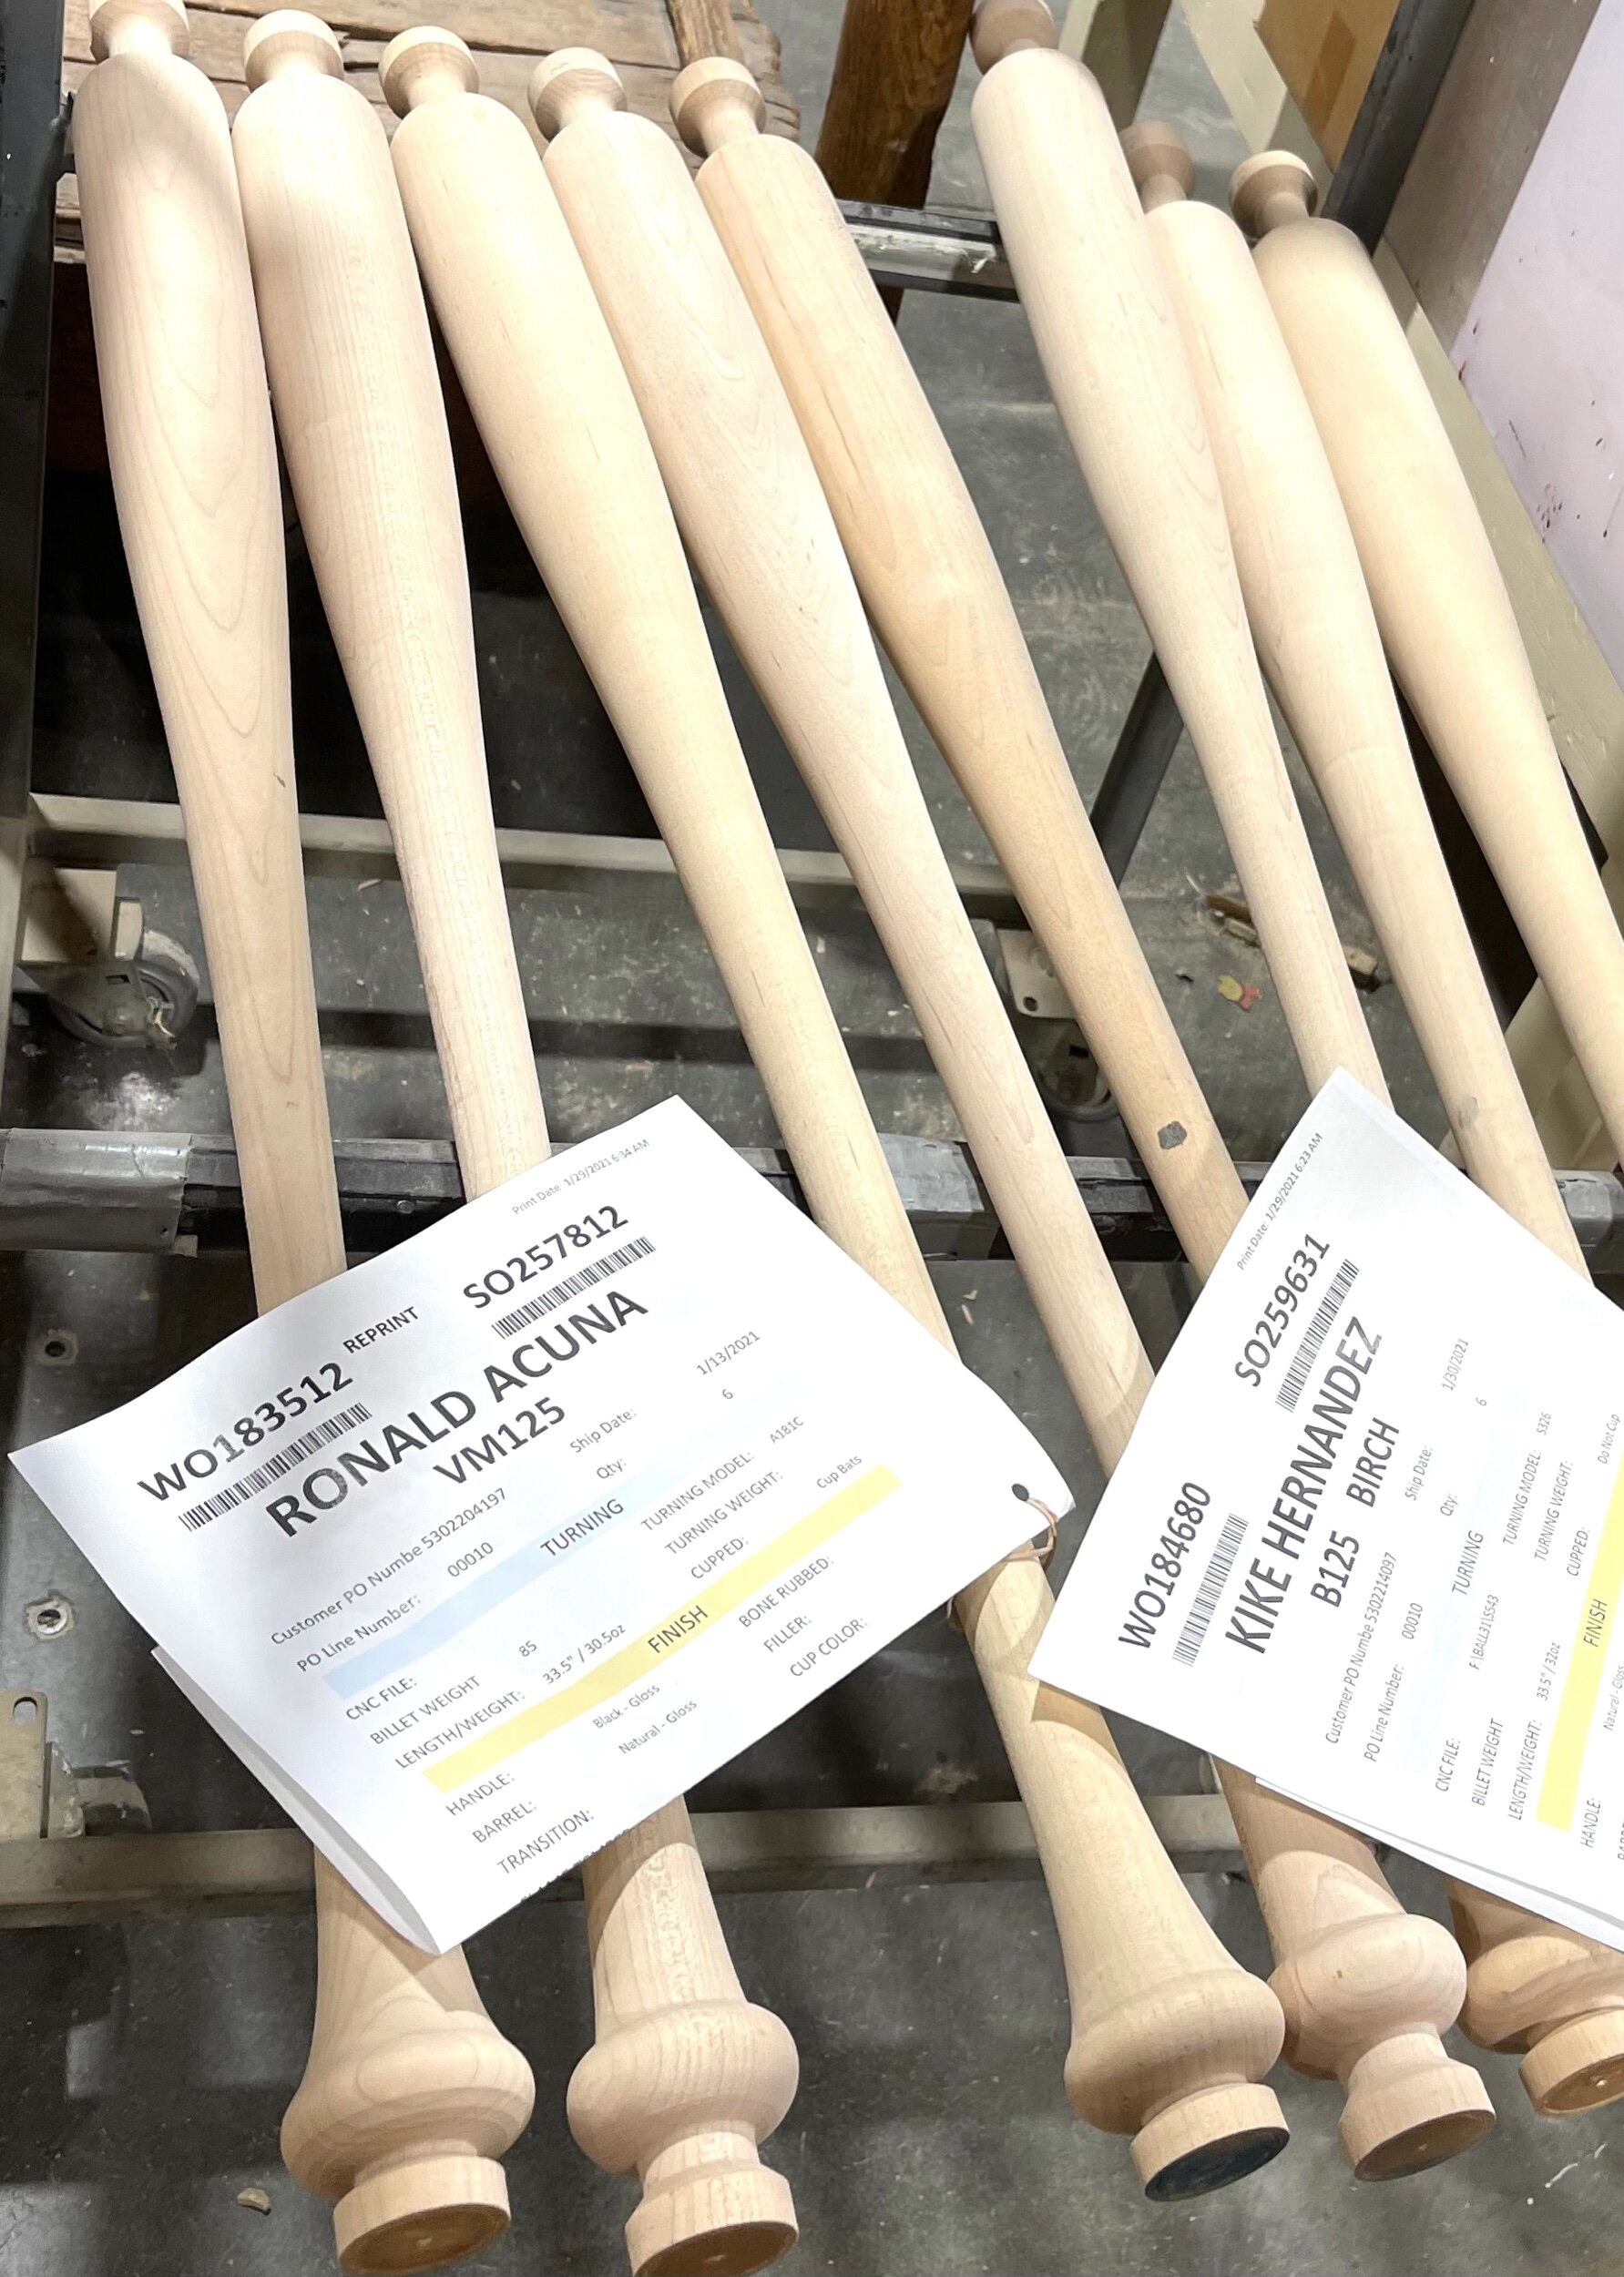  Each Louisville Slugger is made according to a professional player’s specifications for handle size, weight, length, and other details, and a professional player orders 100-120 bats per season. While many players may have used a Louisville Slugger, 